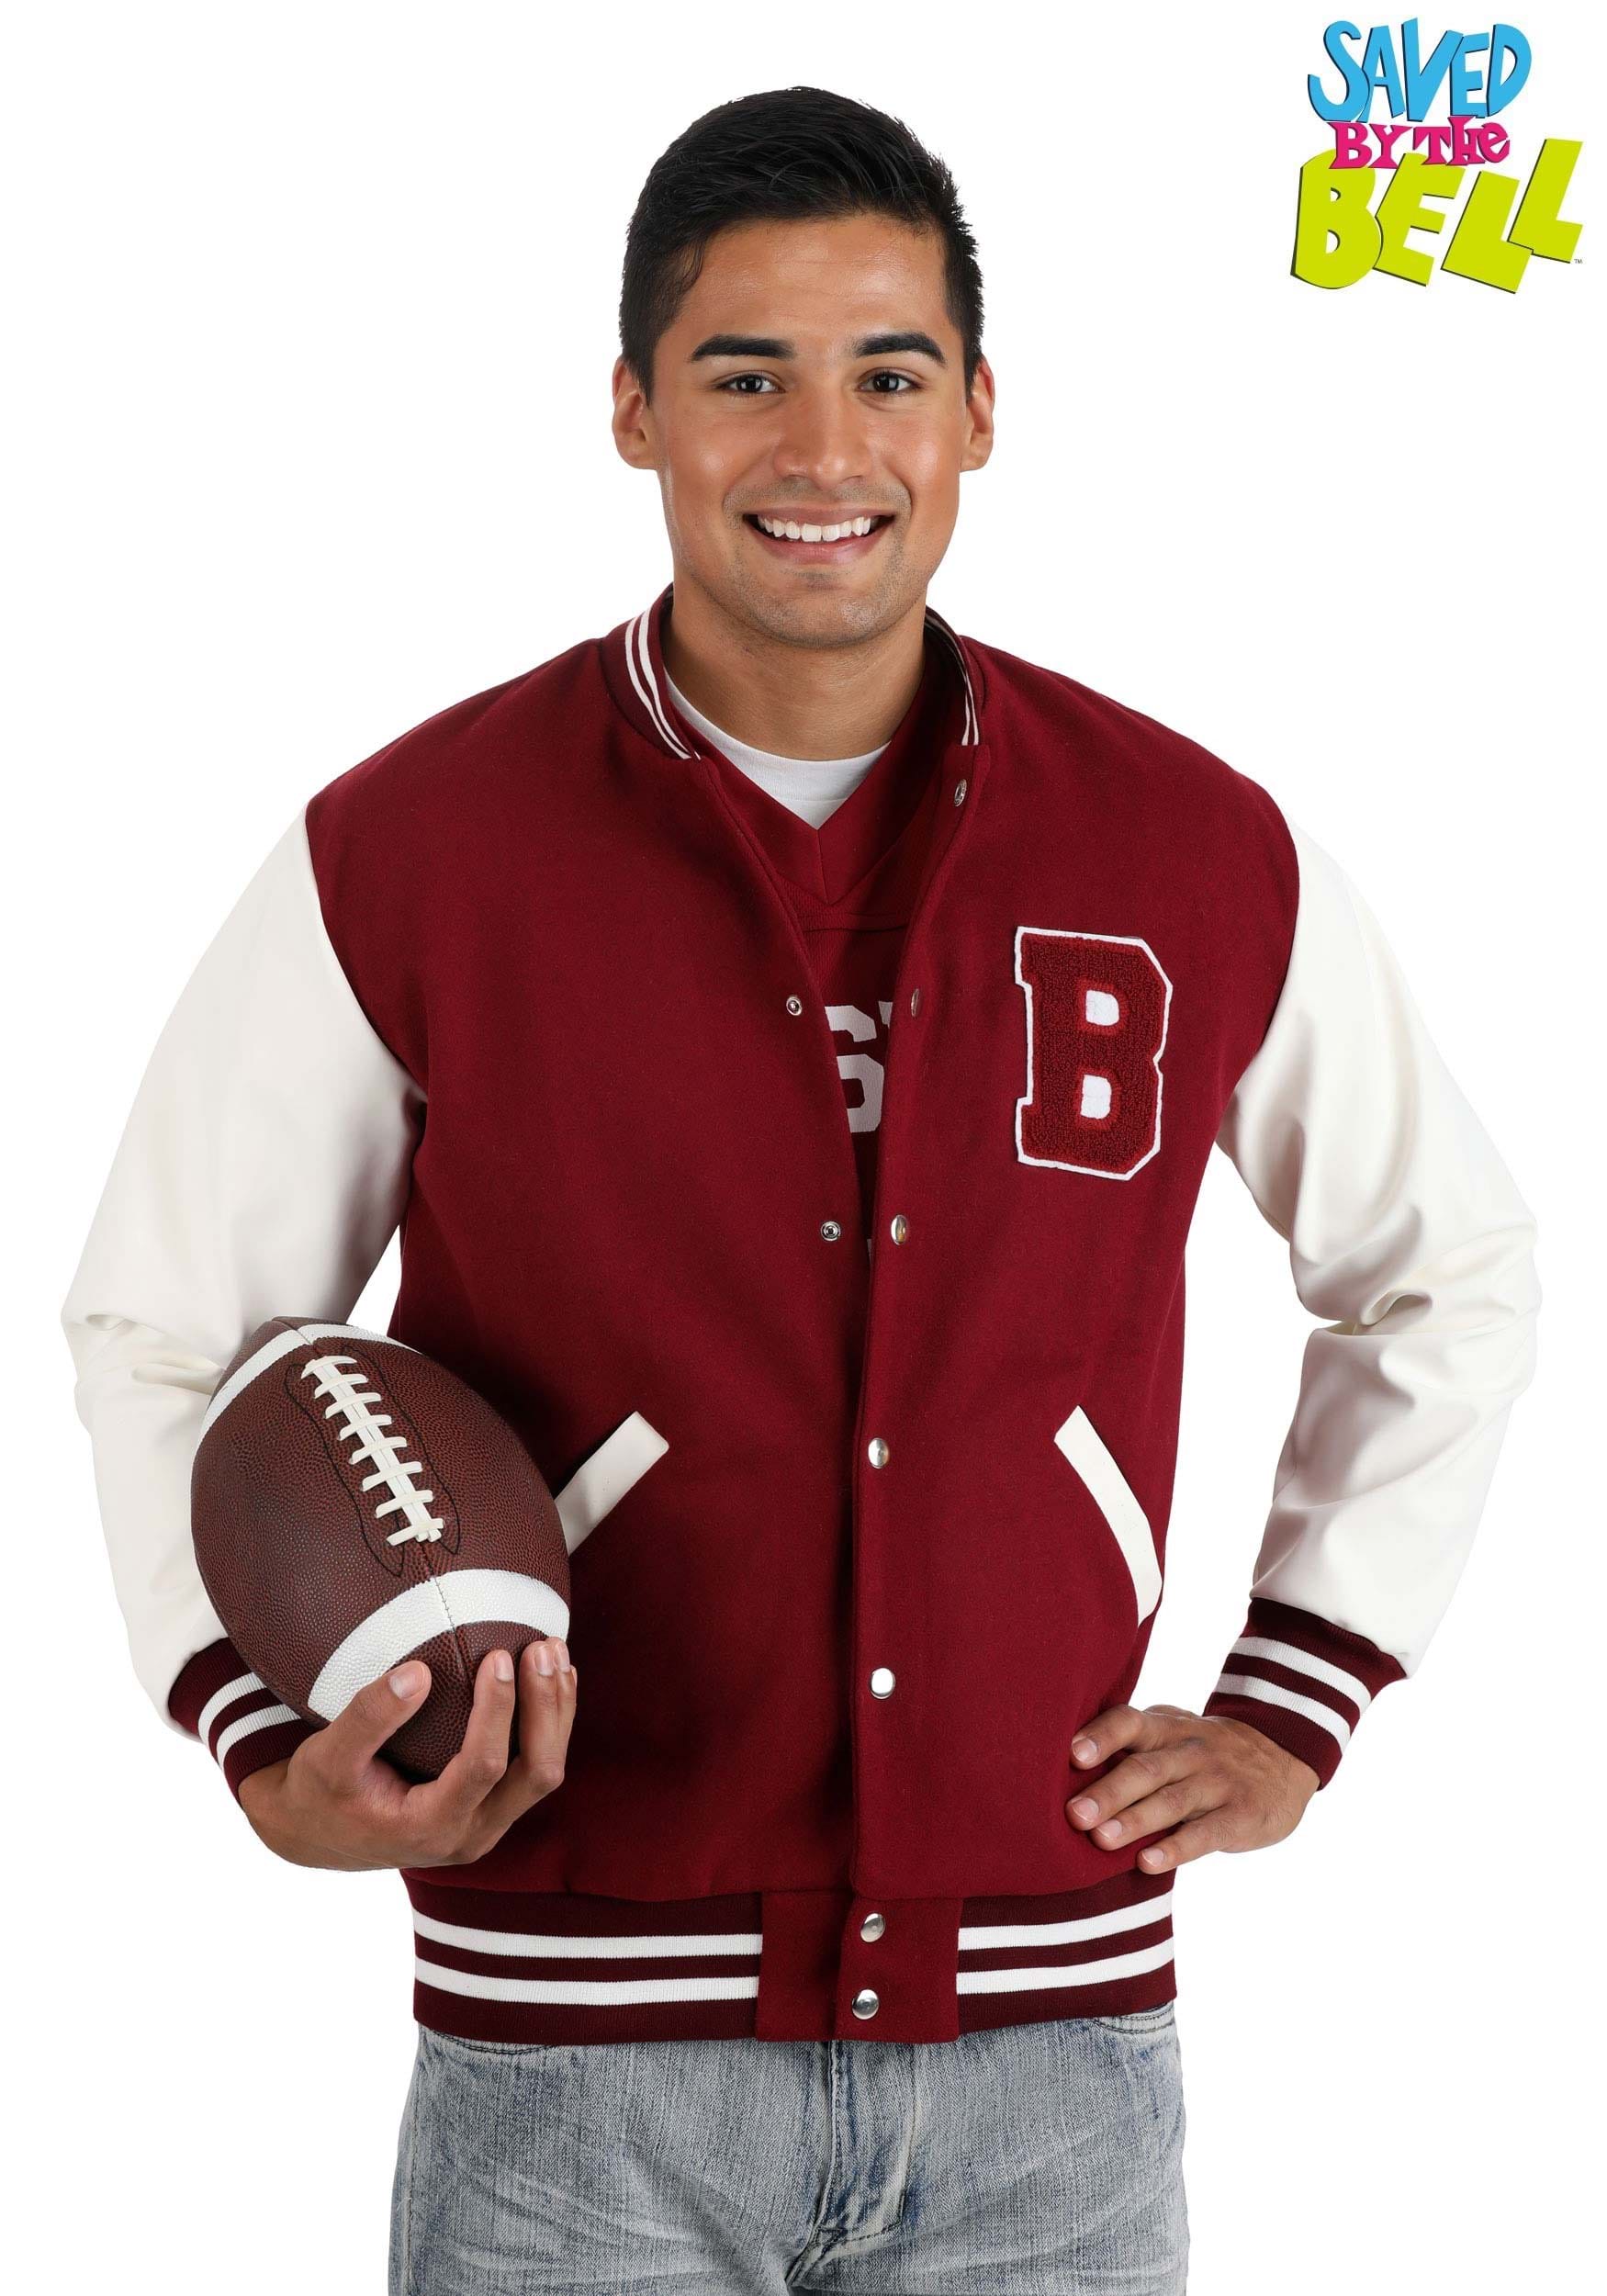 Bayside High Letterman’s Jacket for Adults